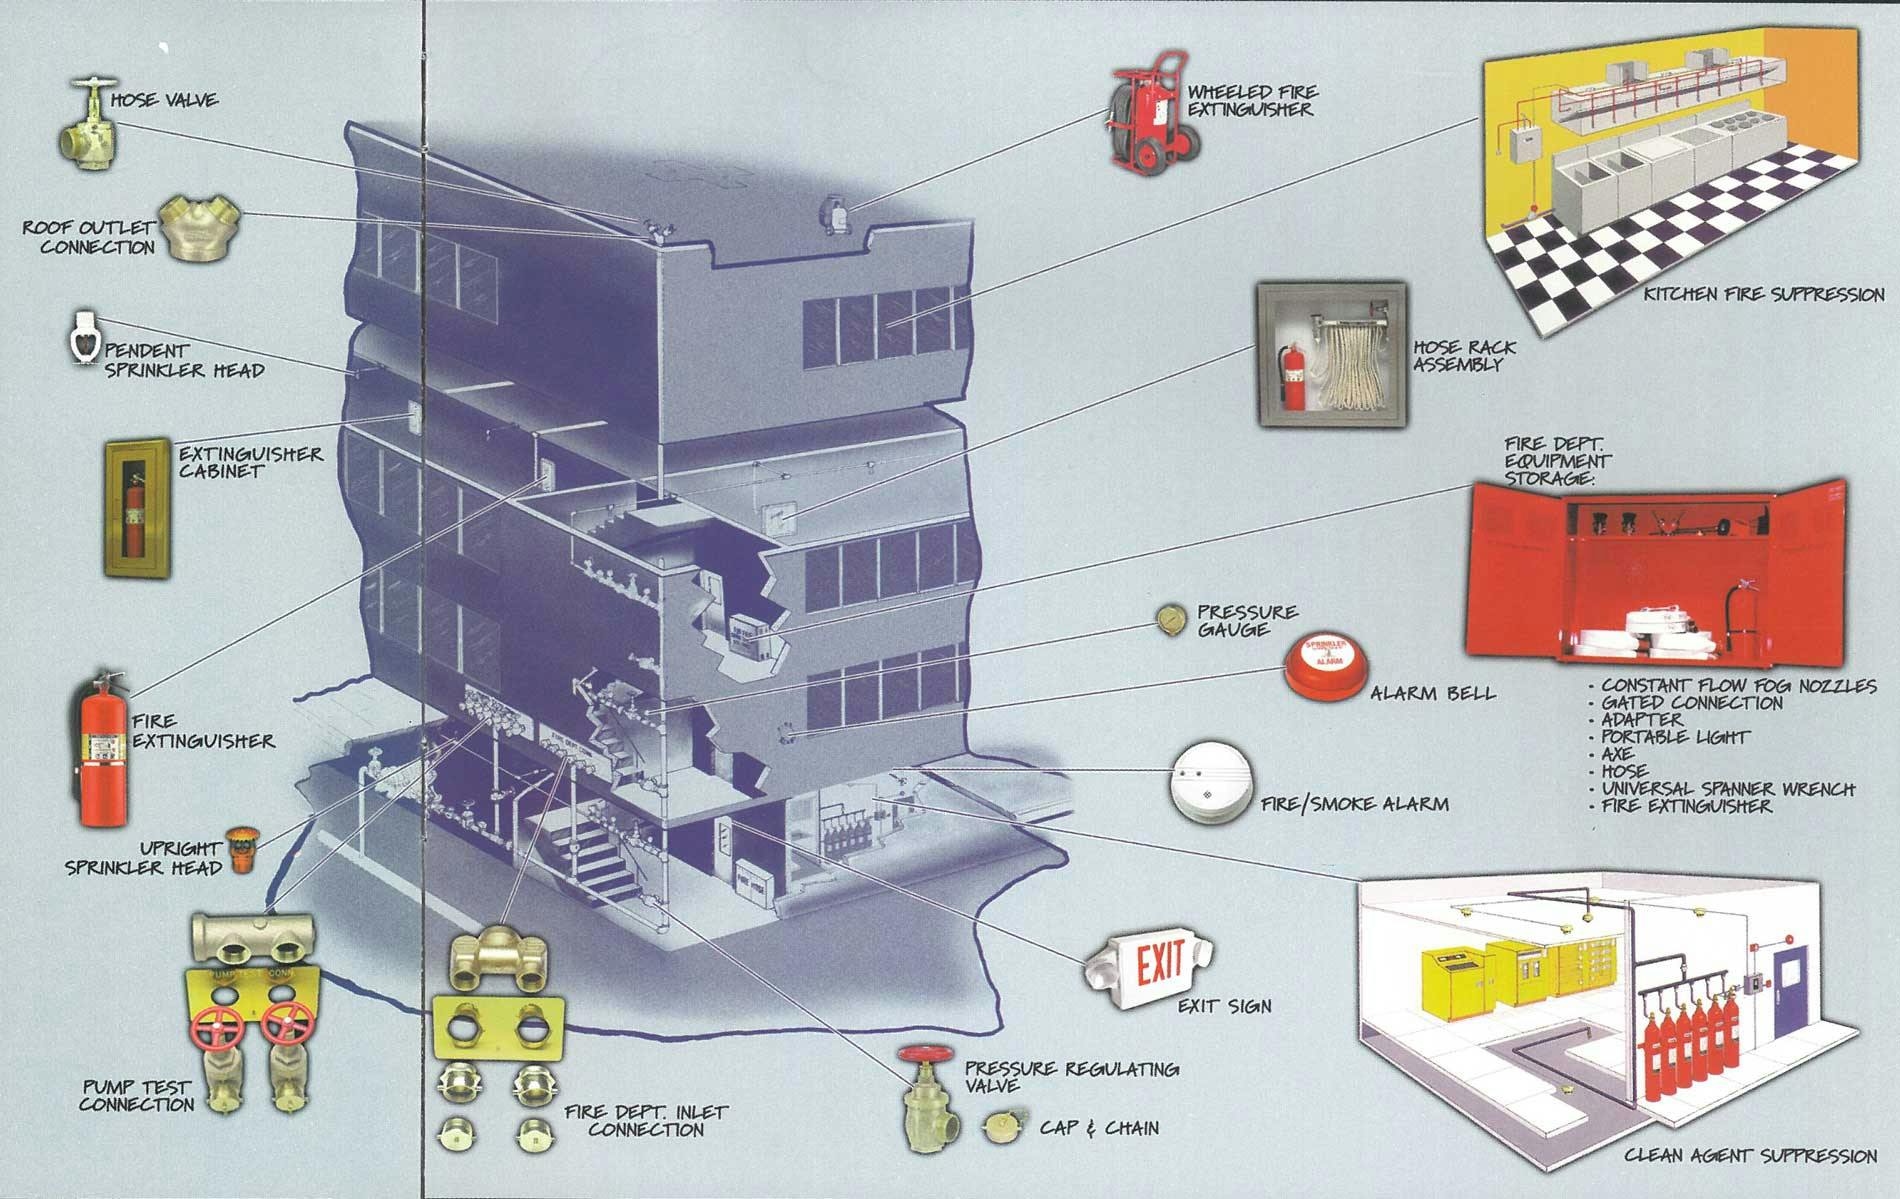 FEMA image of fire safety system icons overlayed on building cut-out